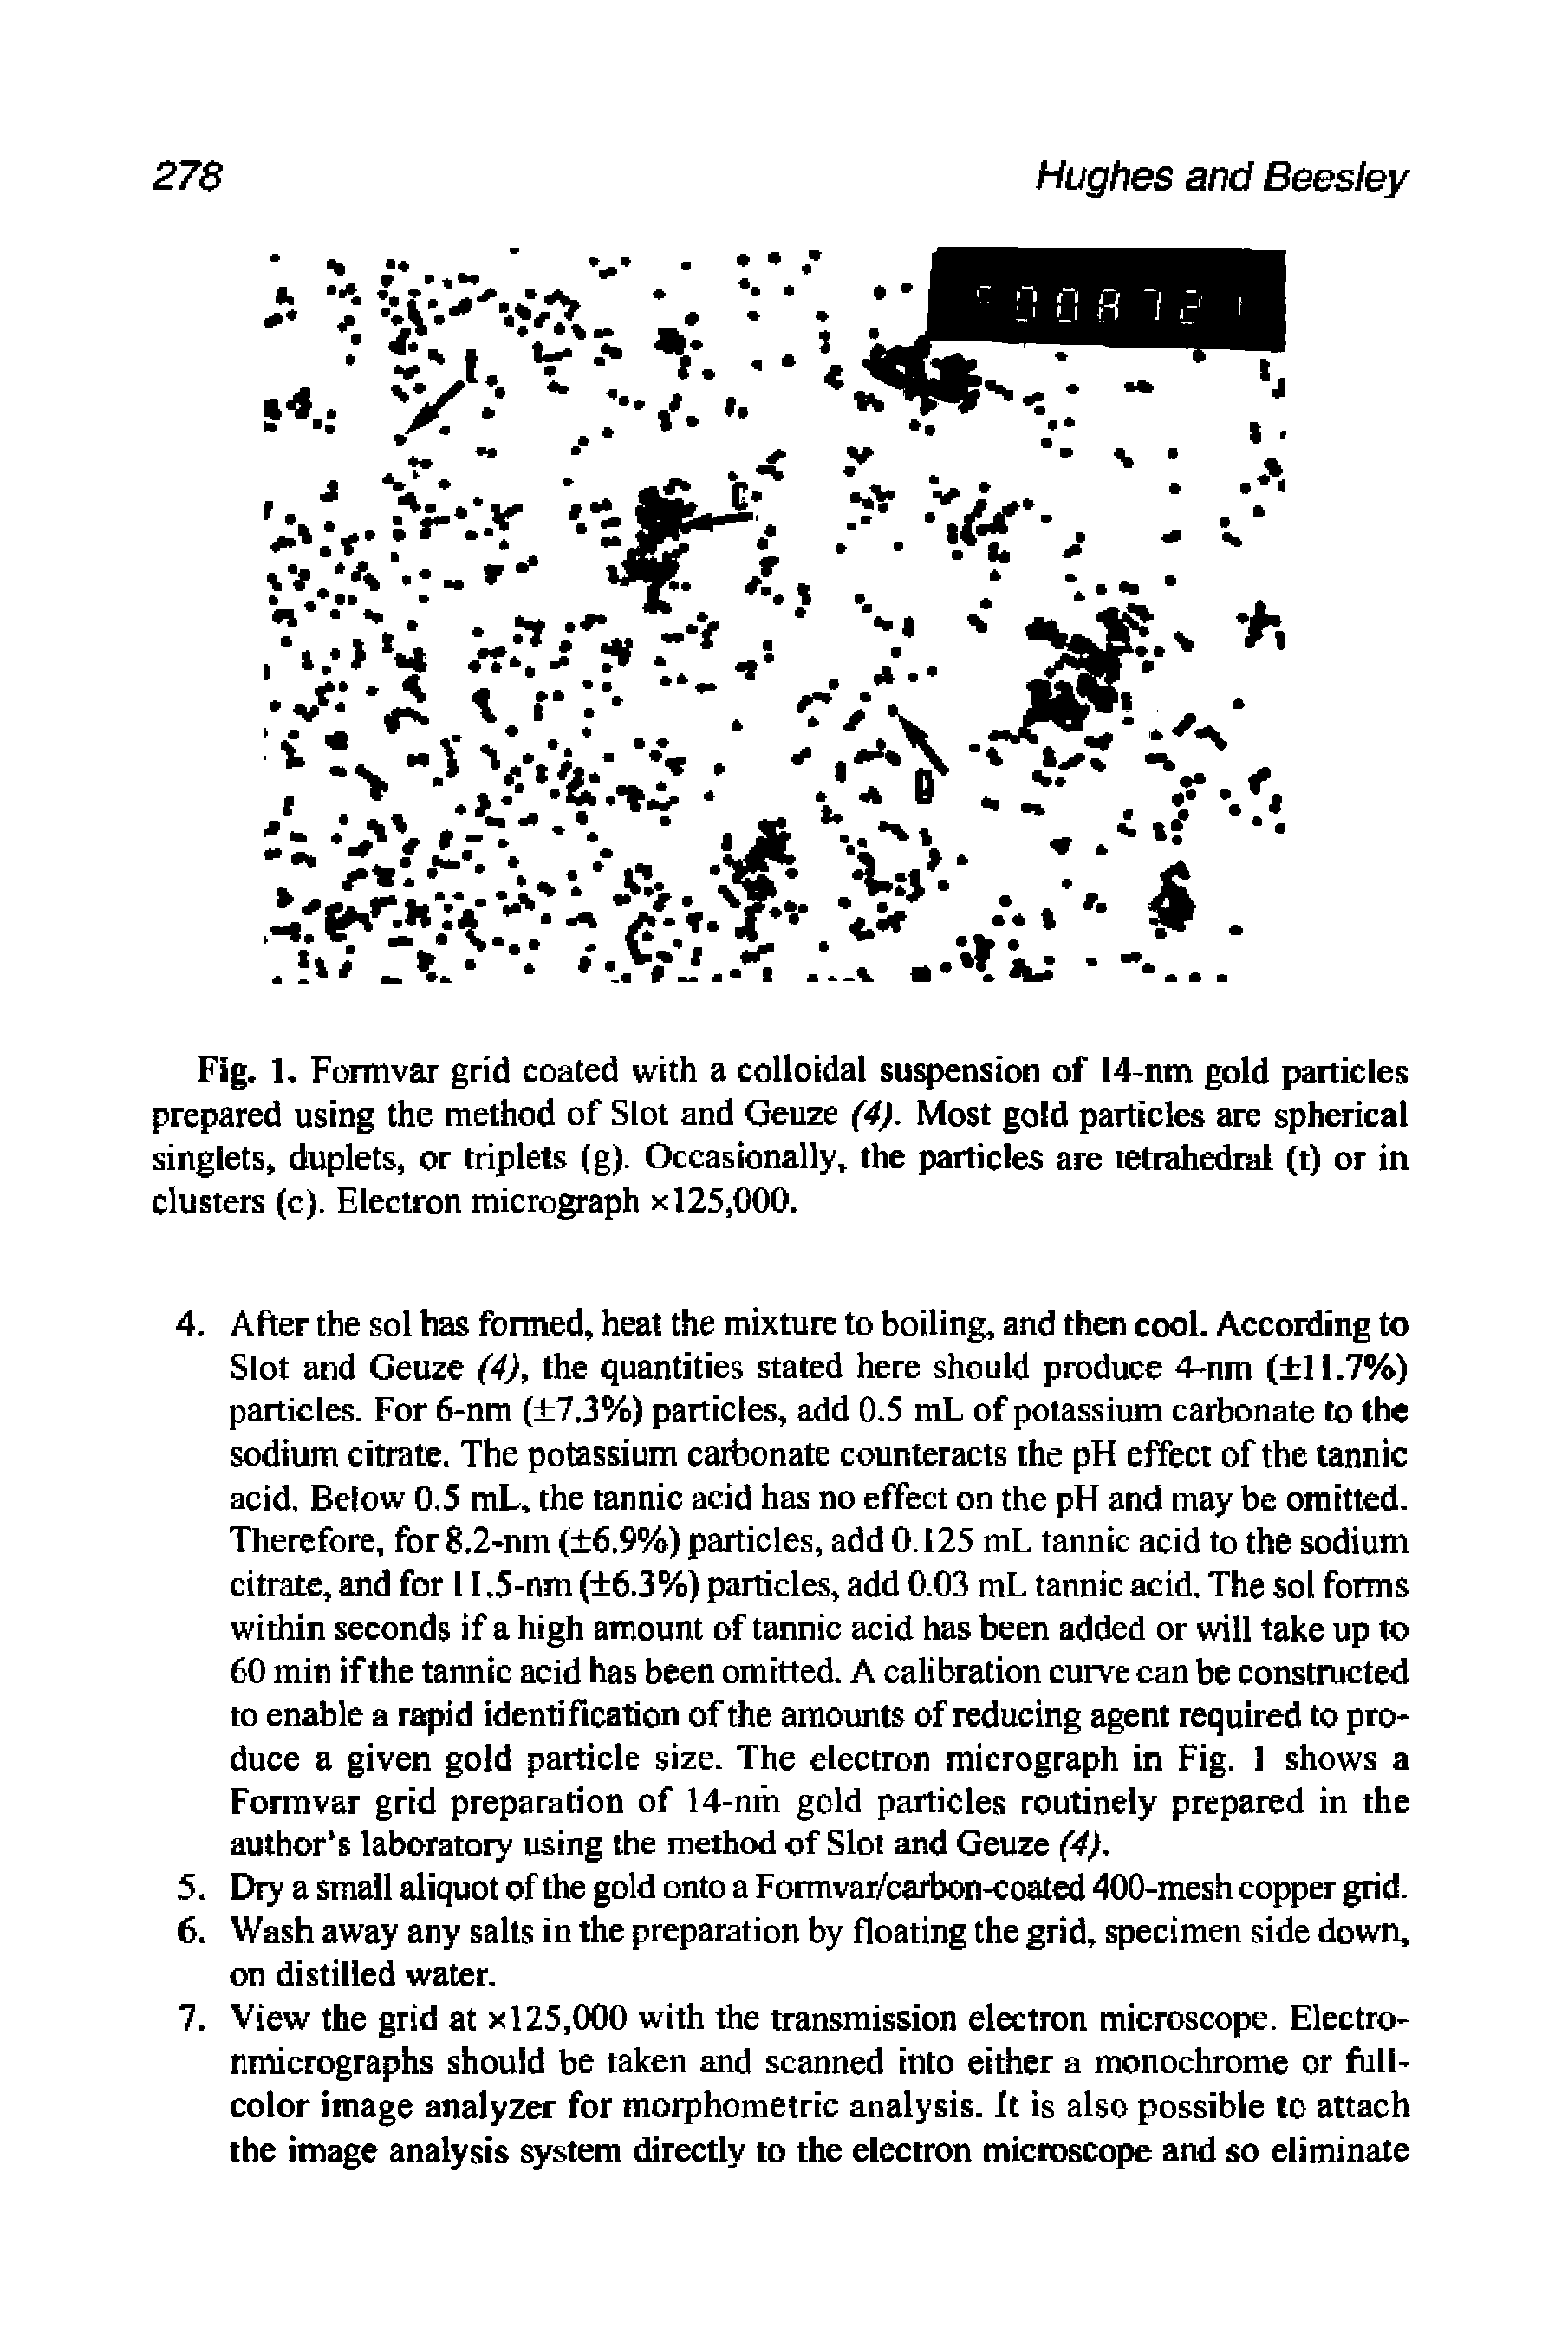 Fig. 1. Formvar grid coated with a colloidal suspension of 14-nm gold particles prepared using the method of Slot and Geuze (4). Most gold particles are spherical singlets, duplets, or triplets (g). Occasionally, the particles are tetrahedral (t) or in clusters (c). Electron micrograph ><125,000.